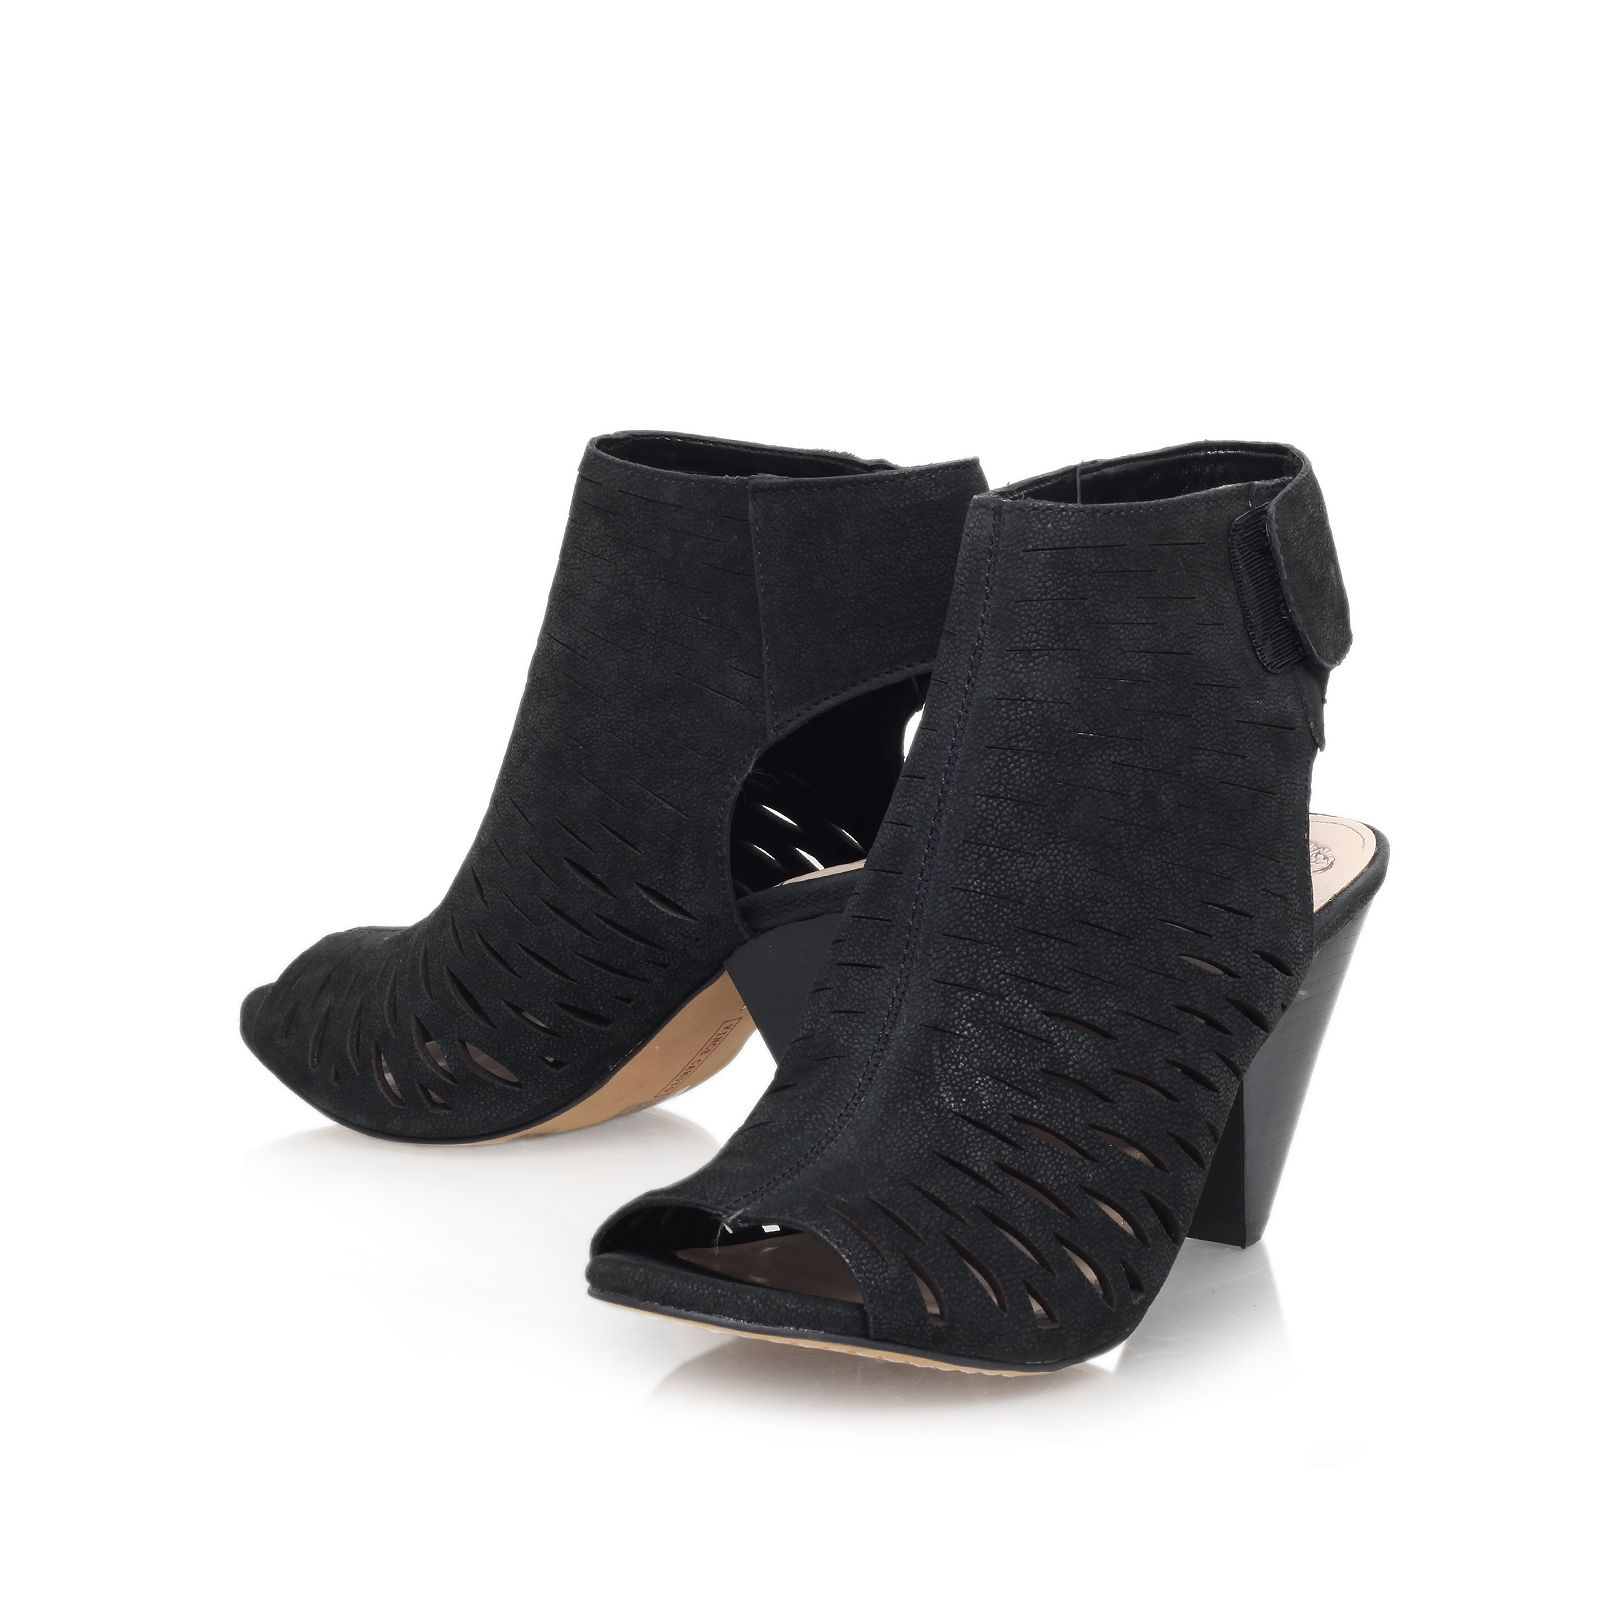 Vince camuto Estell Mid Heel Shoe Boots in Black | Lyst